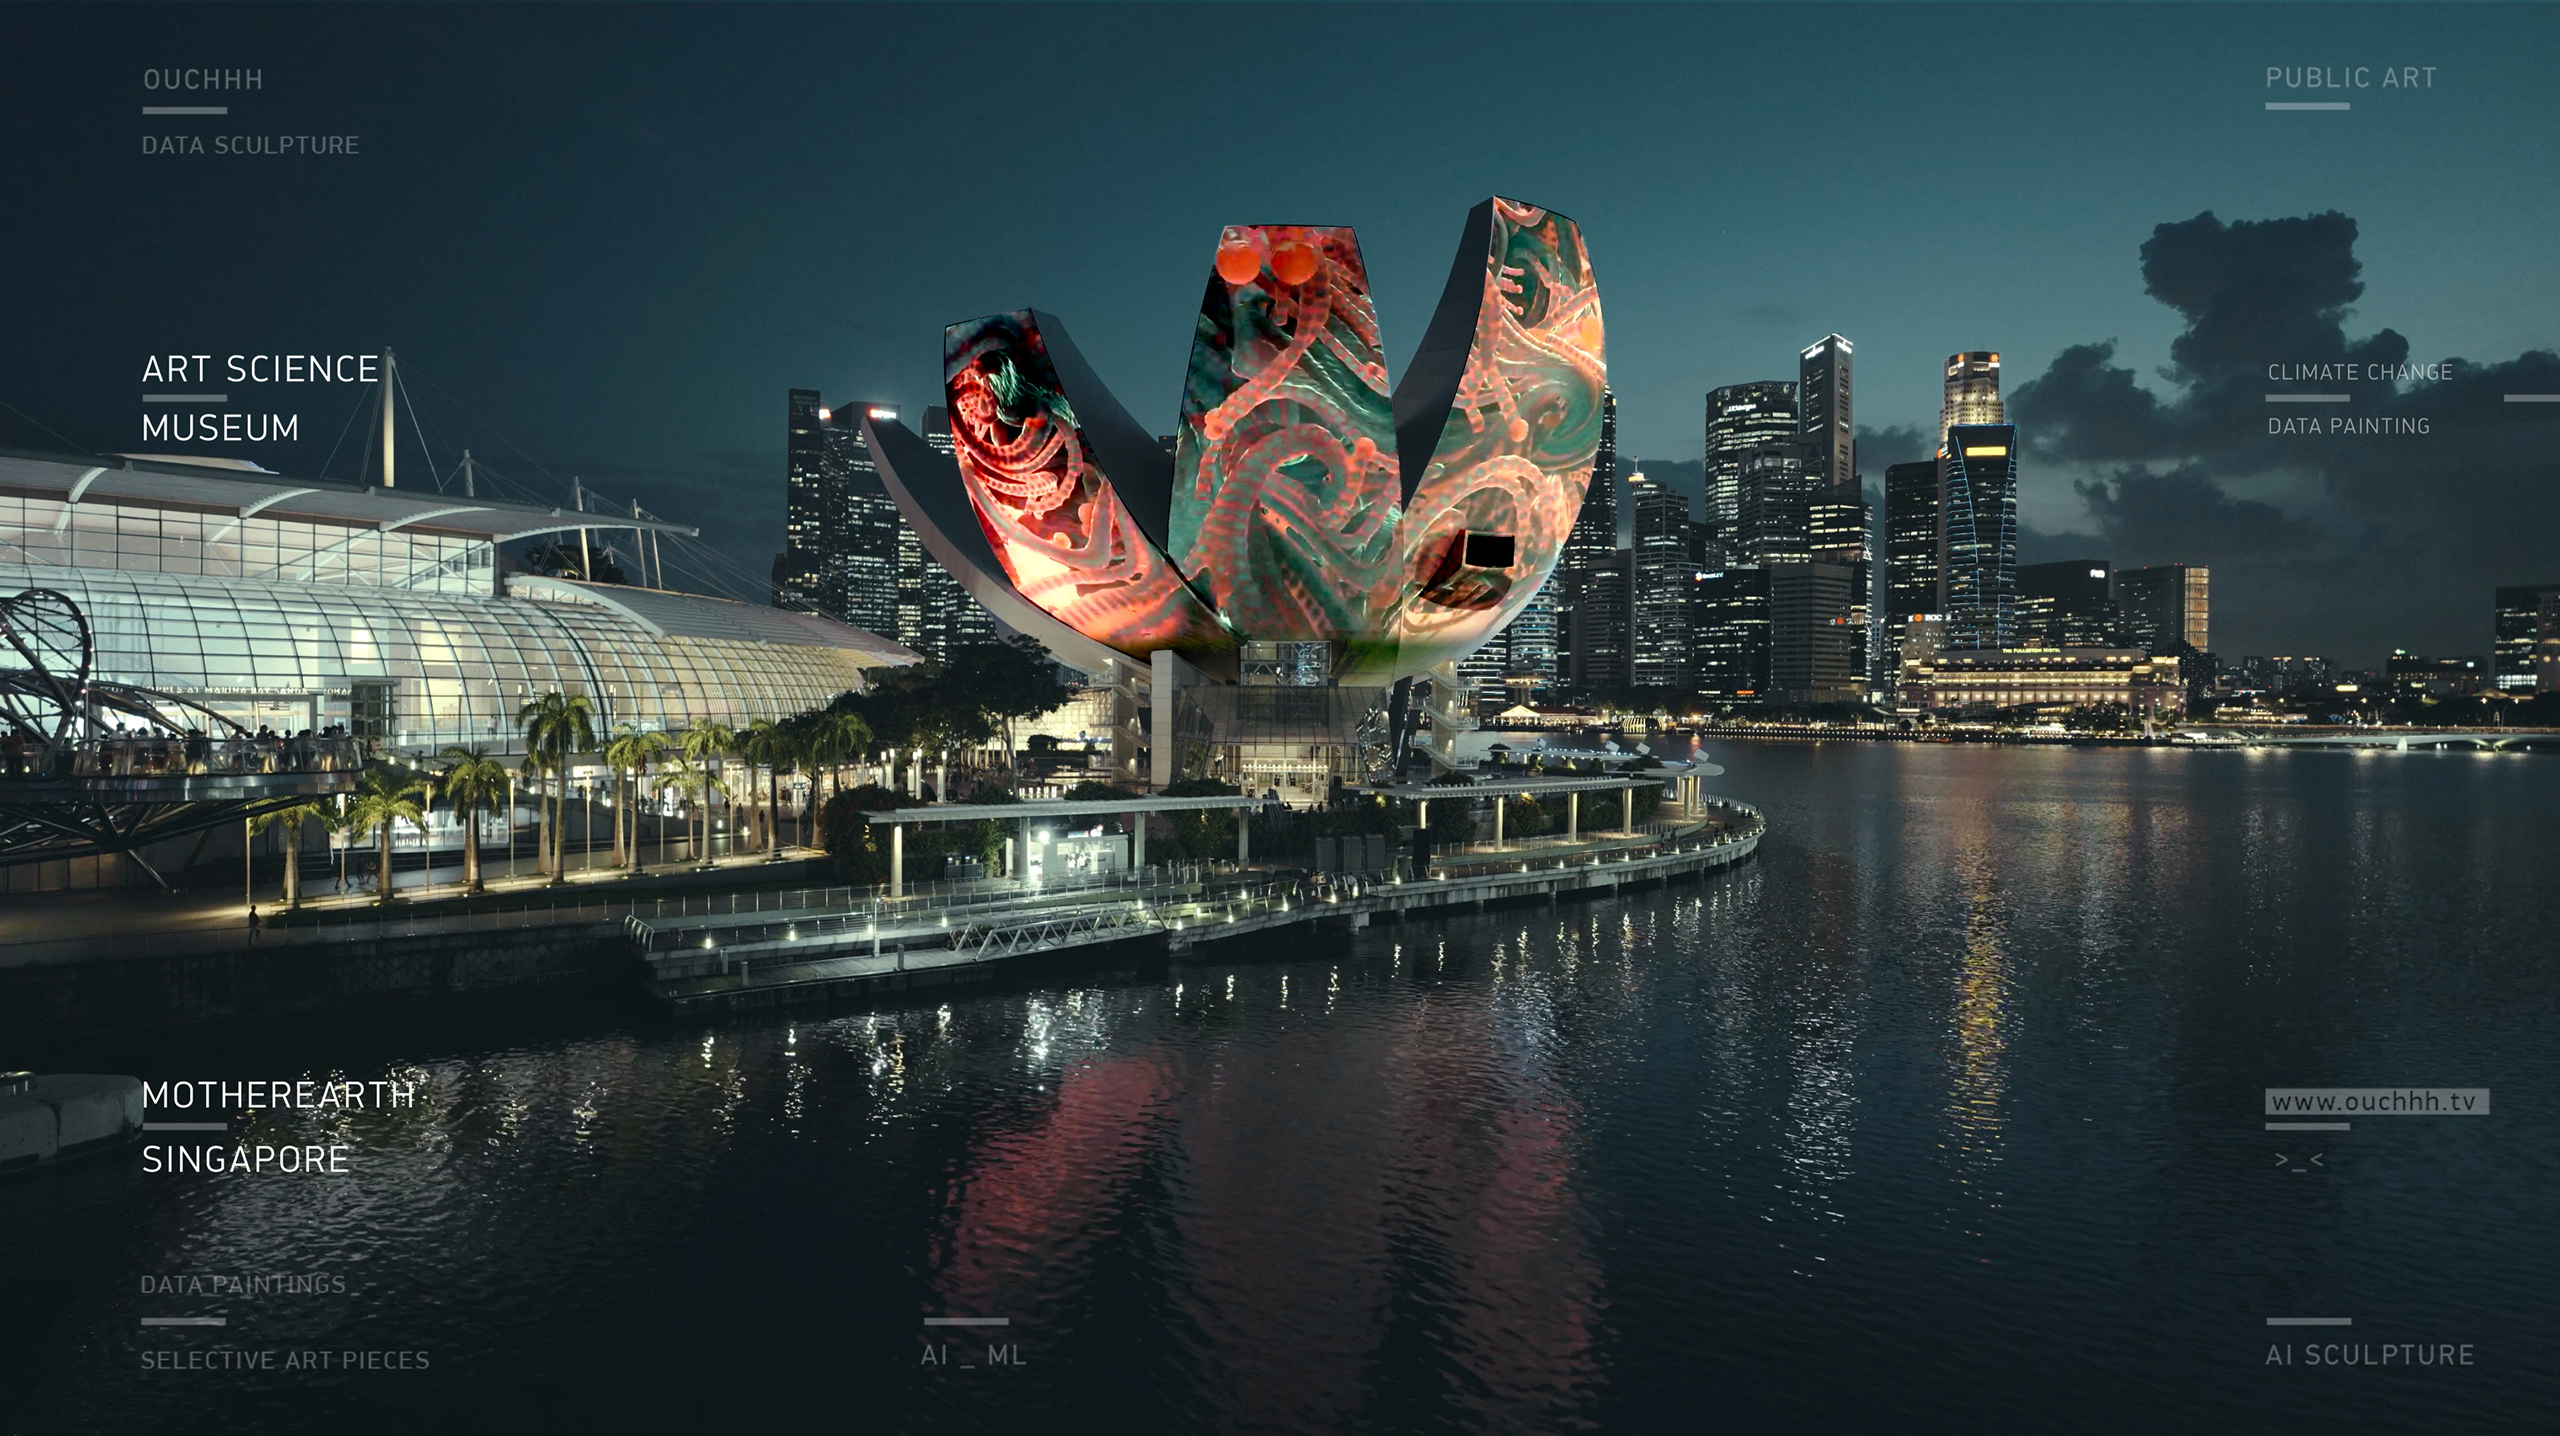 MOTHEREARTH_Climate Change AI Data Painting_Sculpture /  ART SCIENCE MUSEUM_Singapore